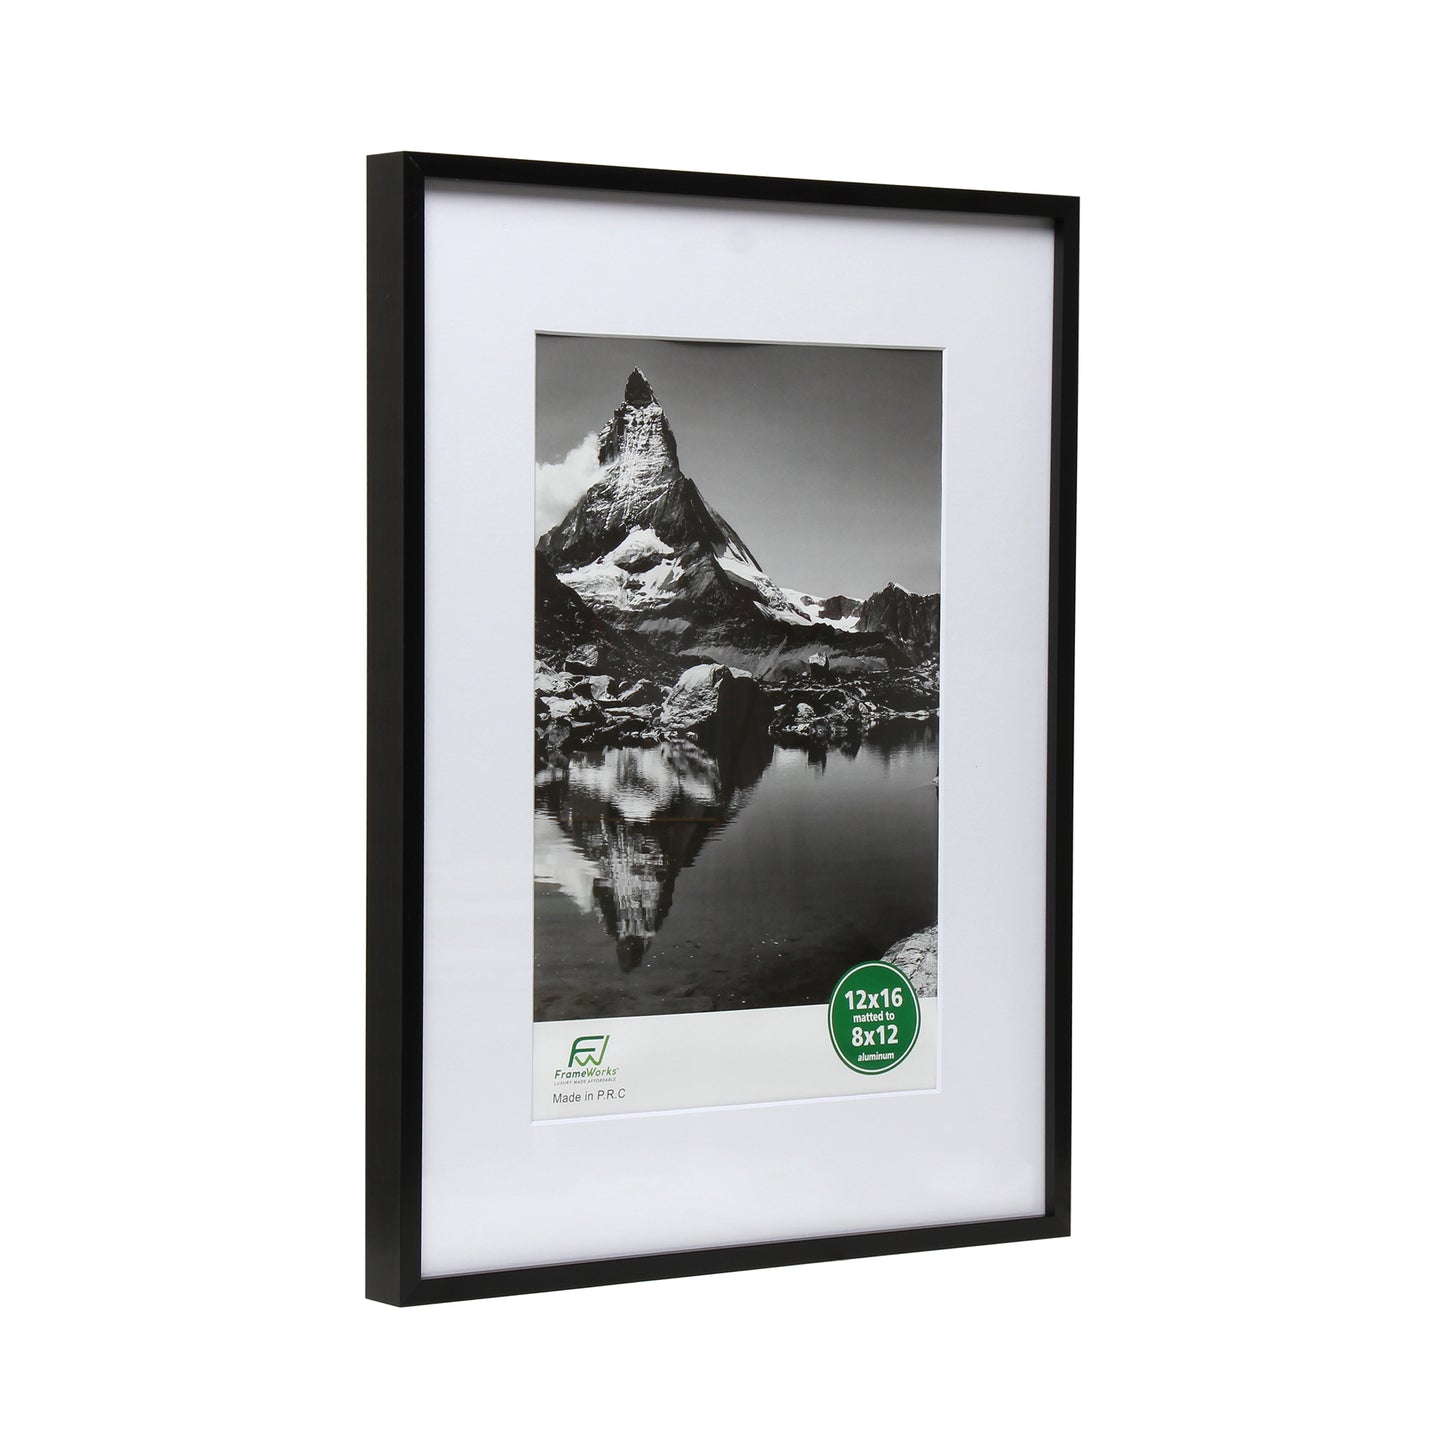 12" x 16" Deluxe Black Aluminum Contemporary Picture Frame, 8" x 12" Matted